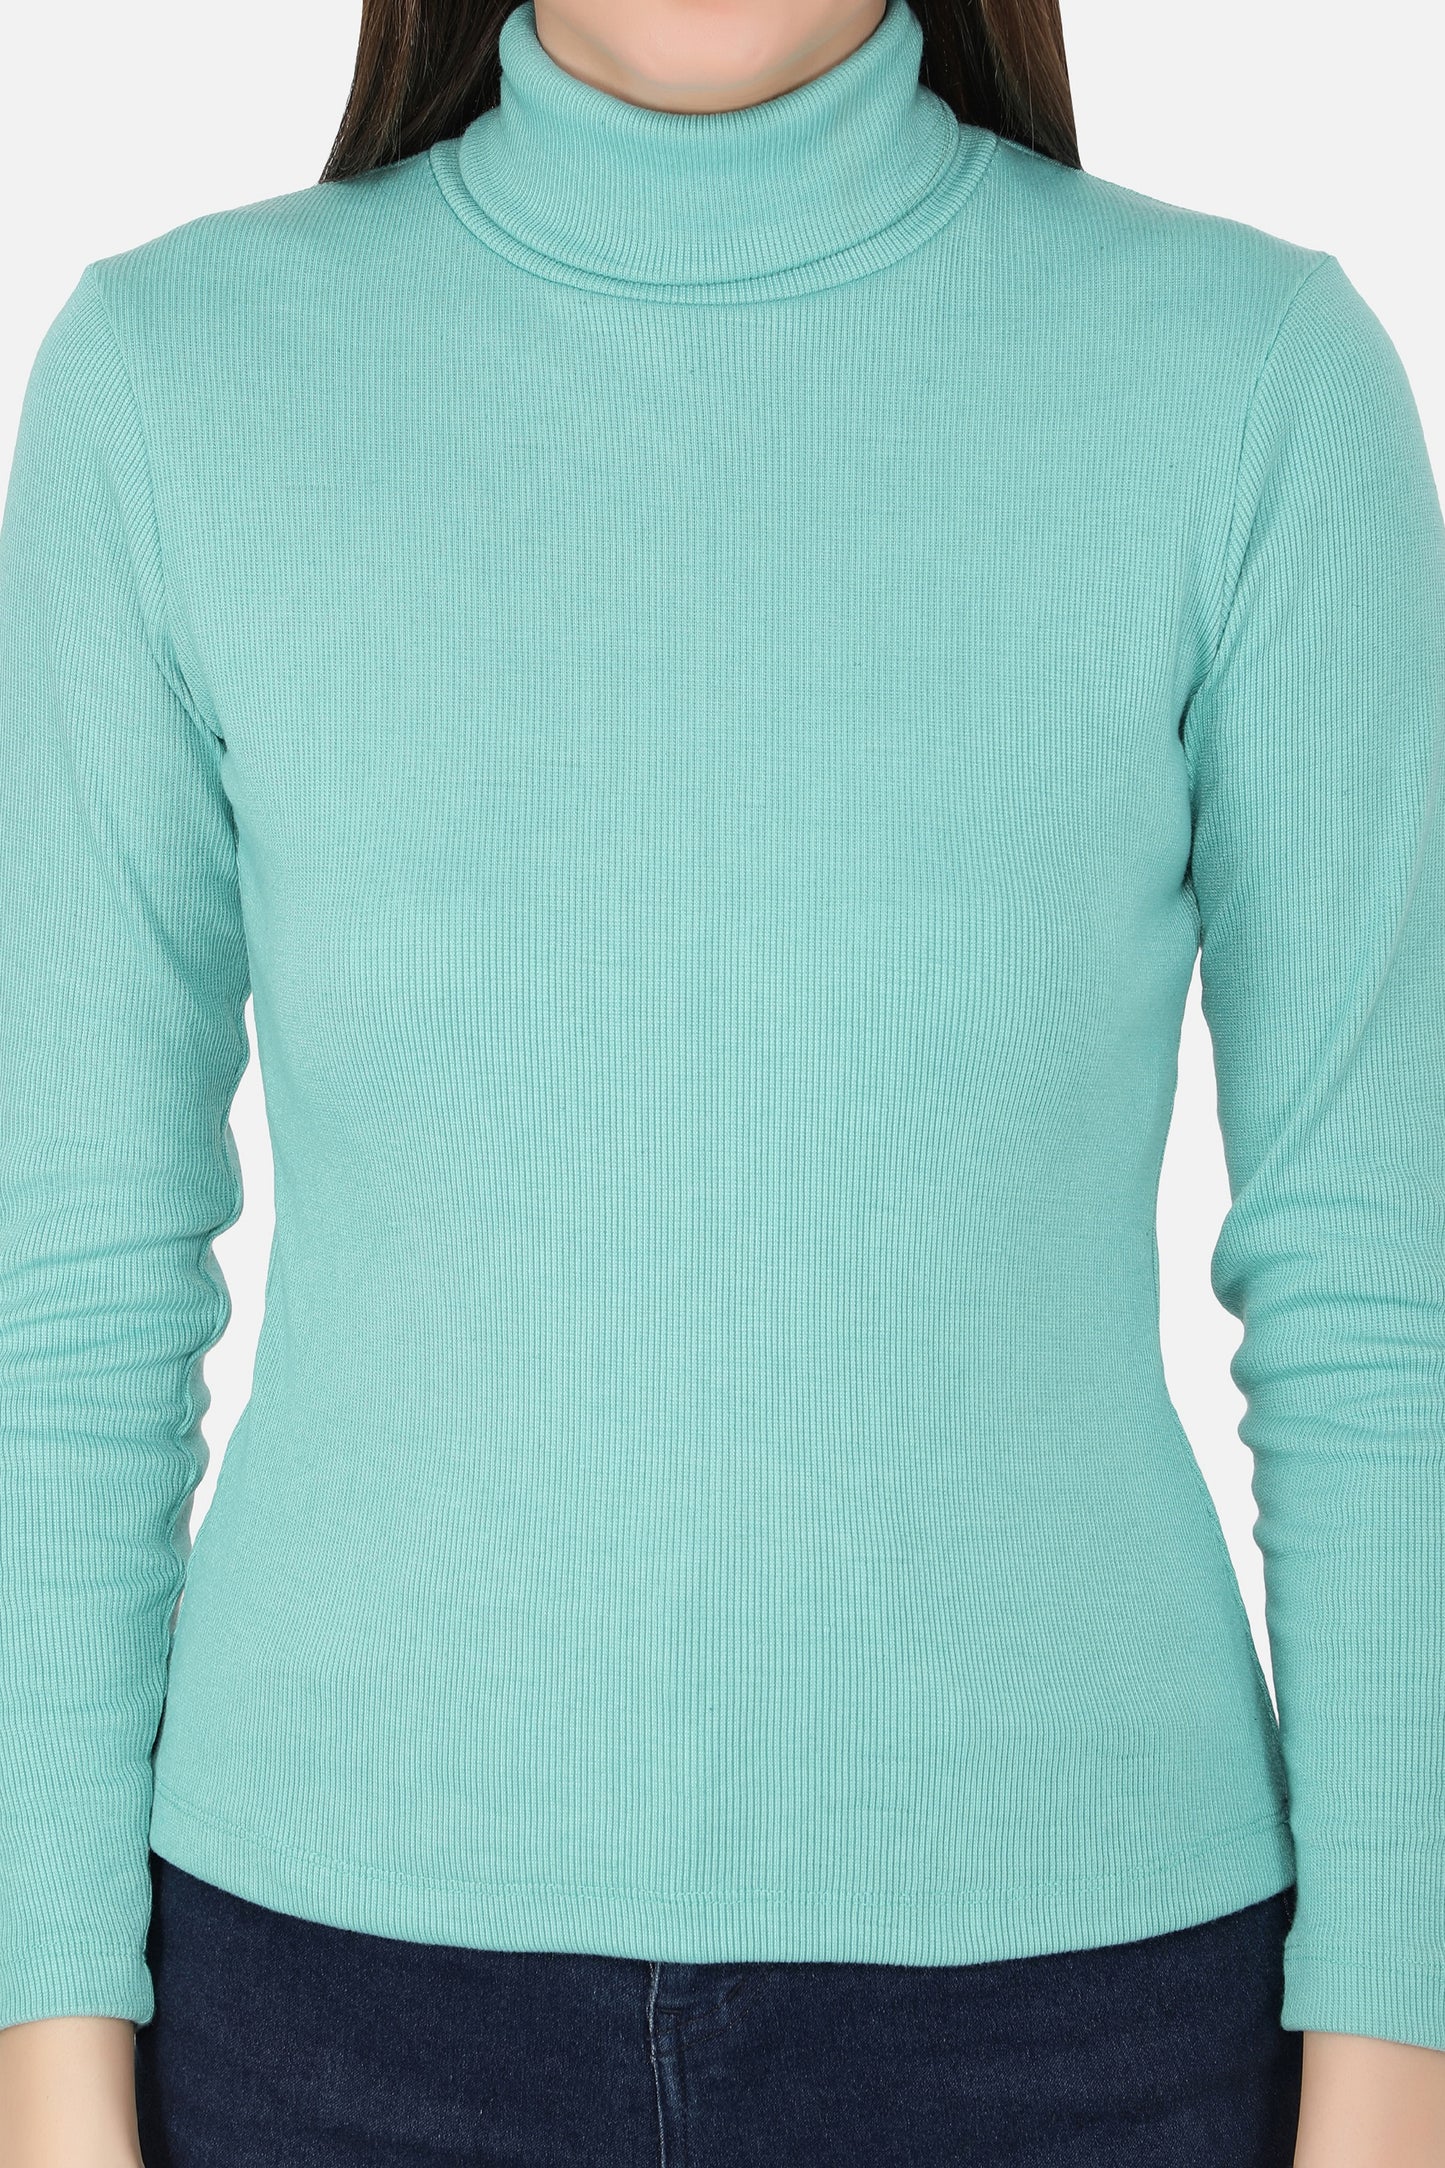 Women Roll-Up Ribbed Solid Aqua High Neck Tops Turtle Neck Top for Women